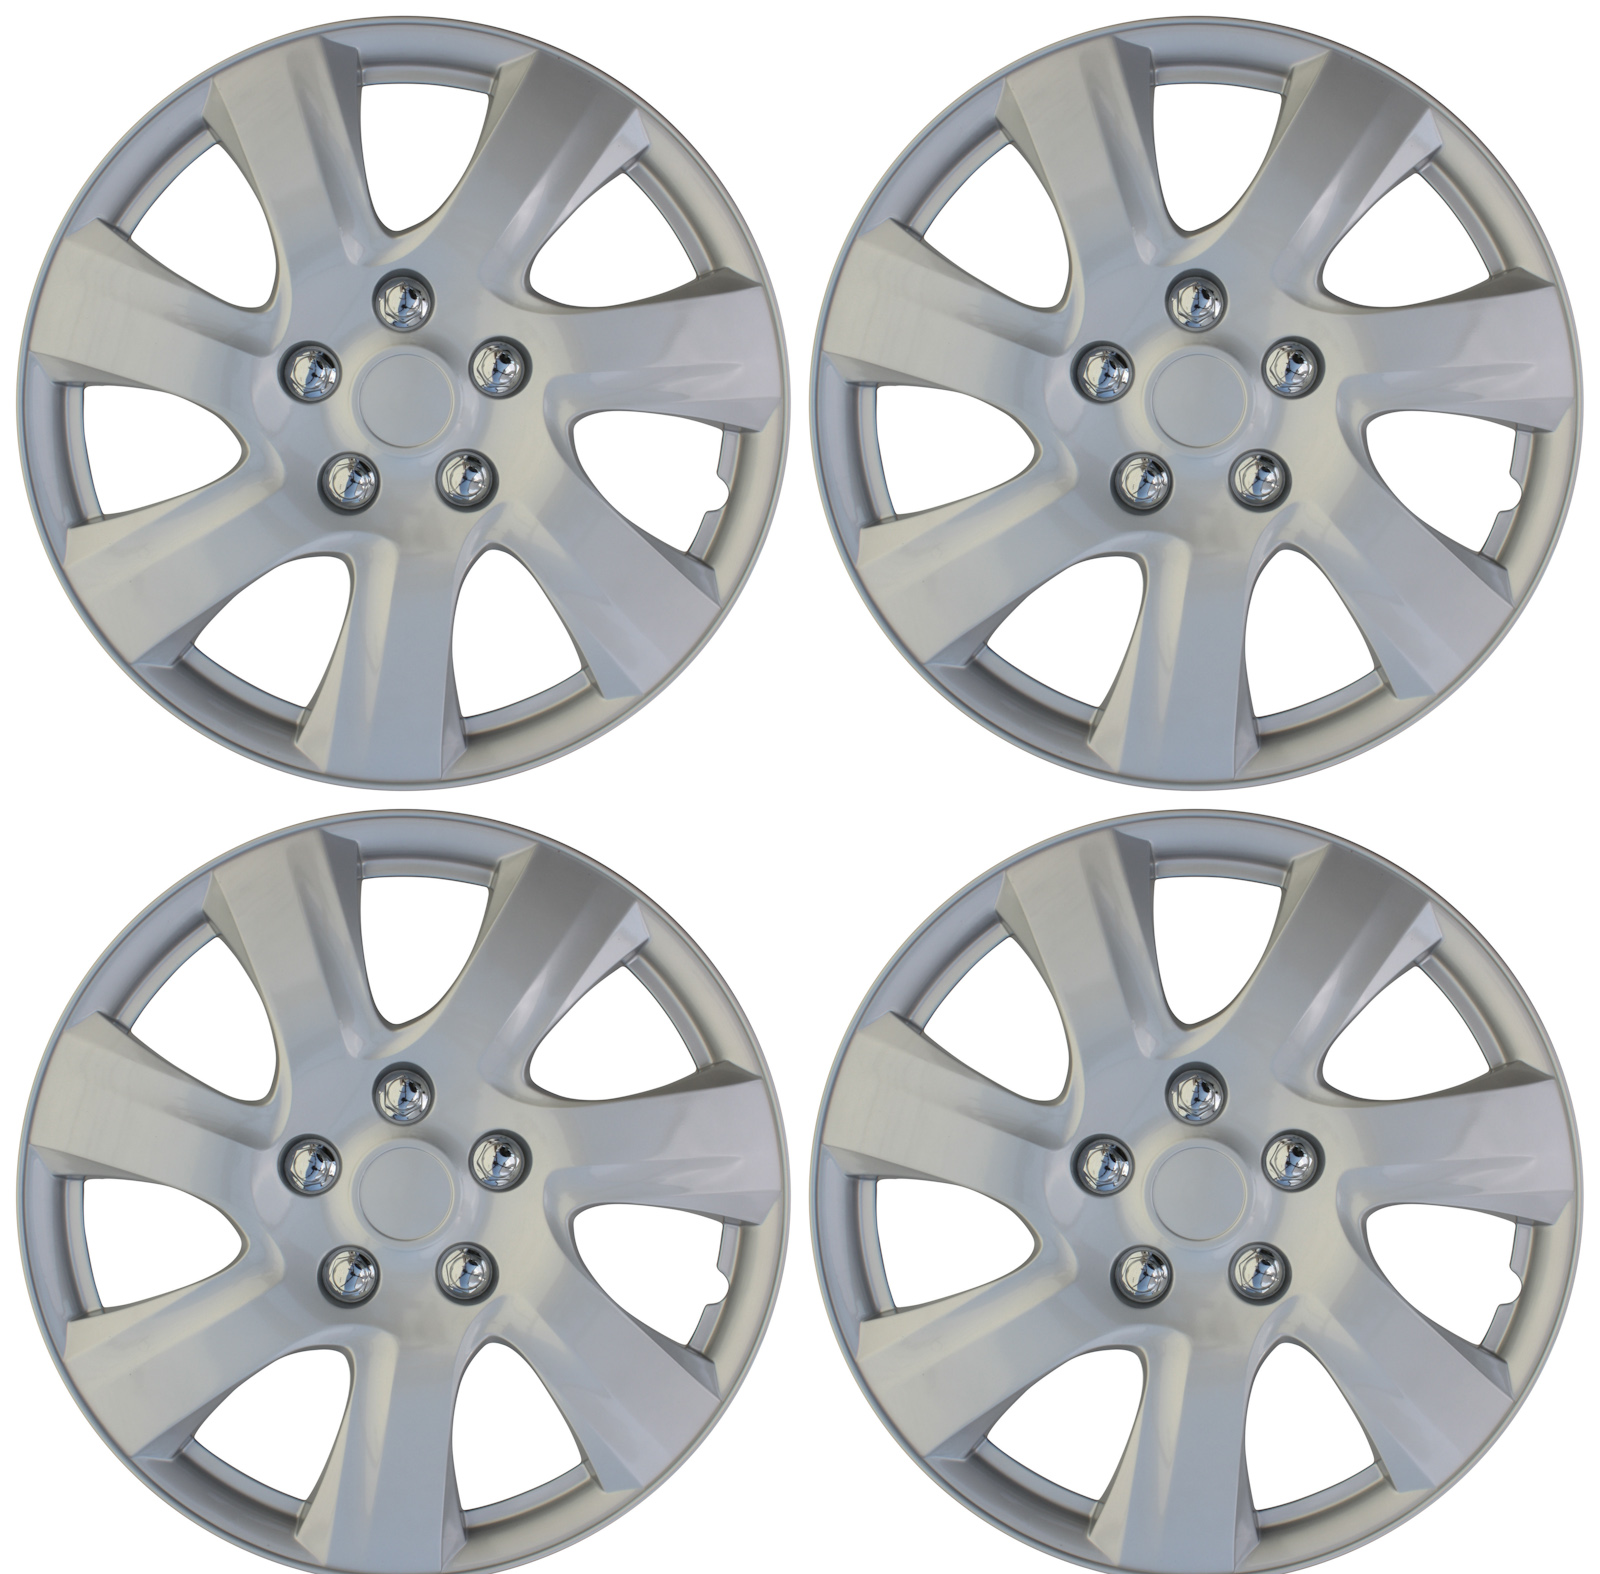 Silver//Black 16in Wheel Cover Hubcaps for Steel Wheels /'Universal/' Style 4pc